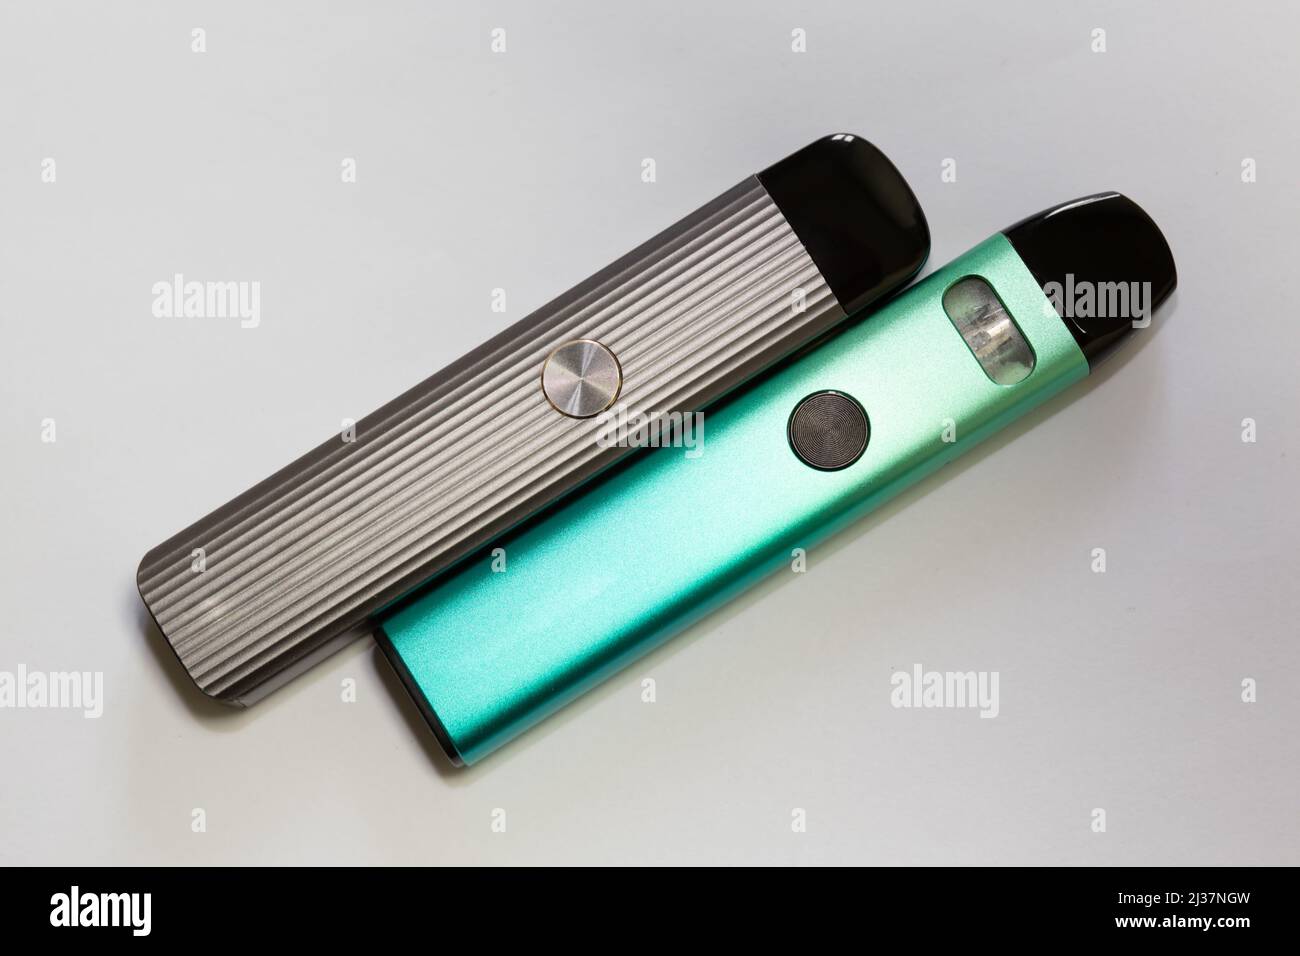 New system electronic cigarettes. Vape pod system or pod mod. Small and lightweight nicotine vapor sticks with replaceable cartridges. Stock Photo